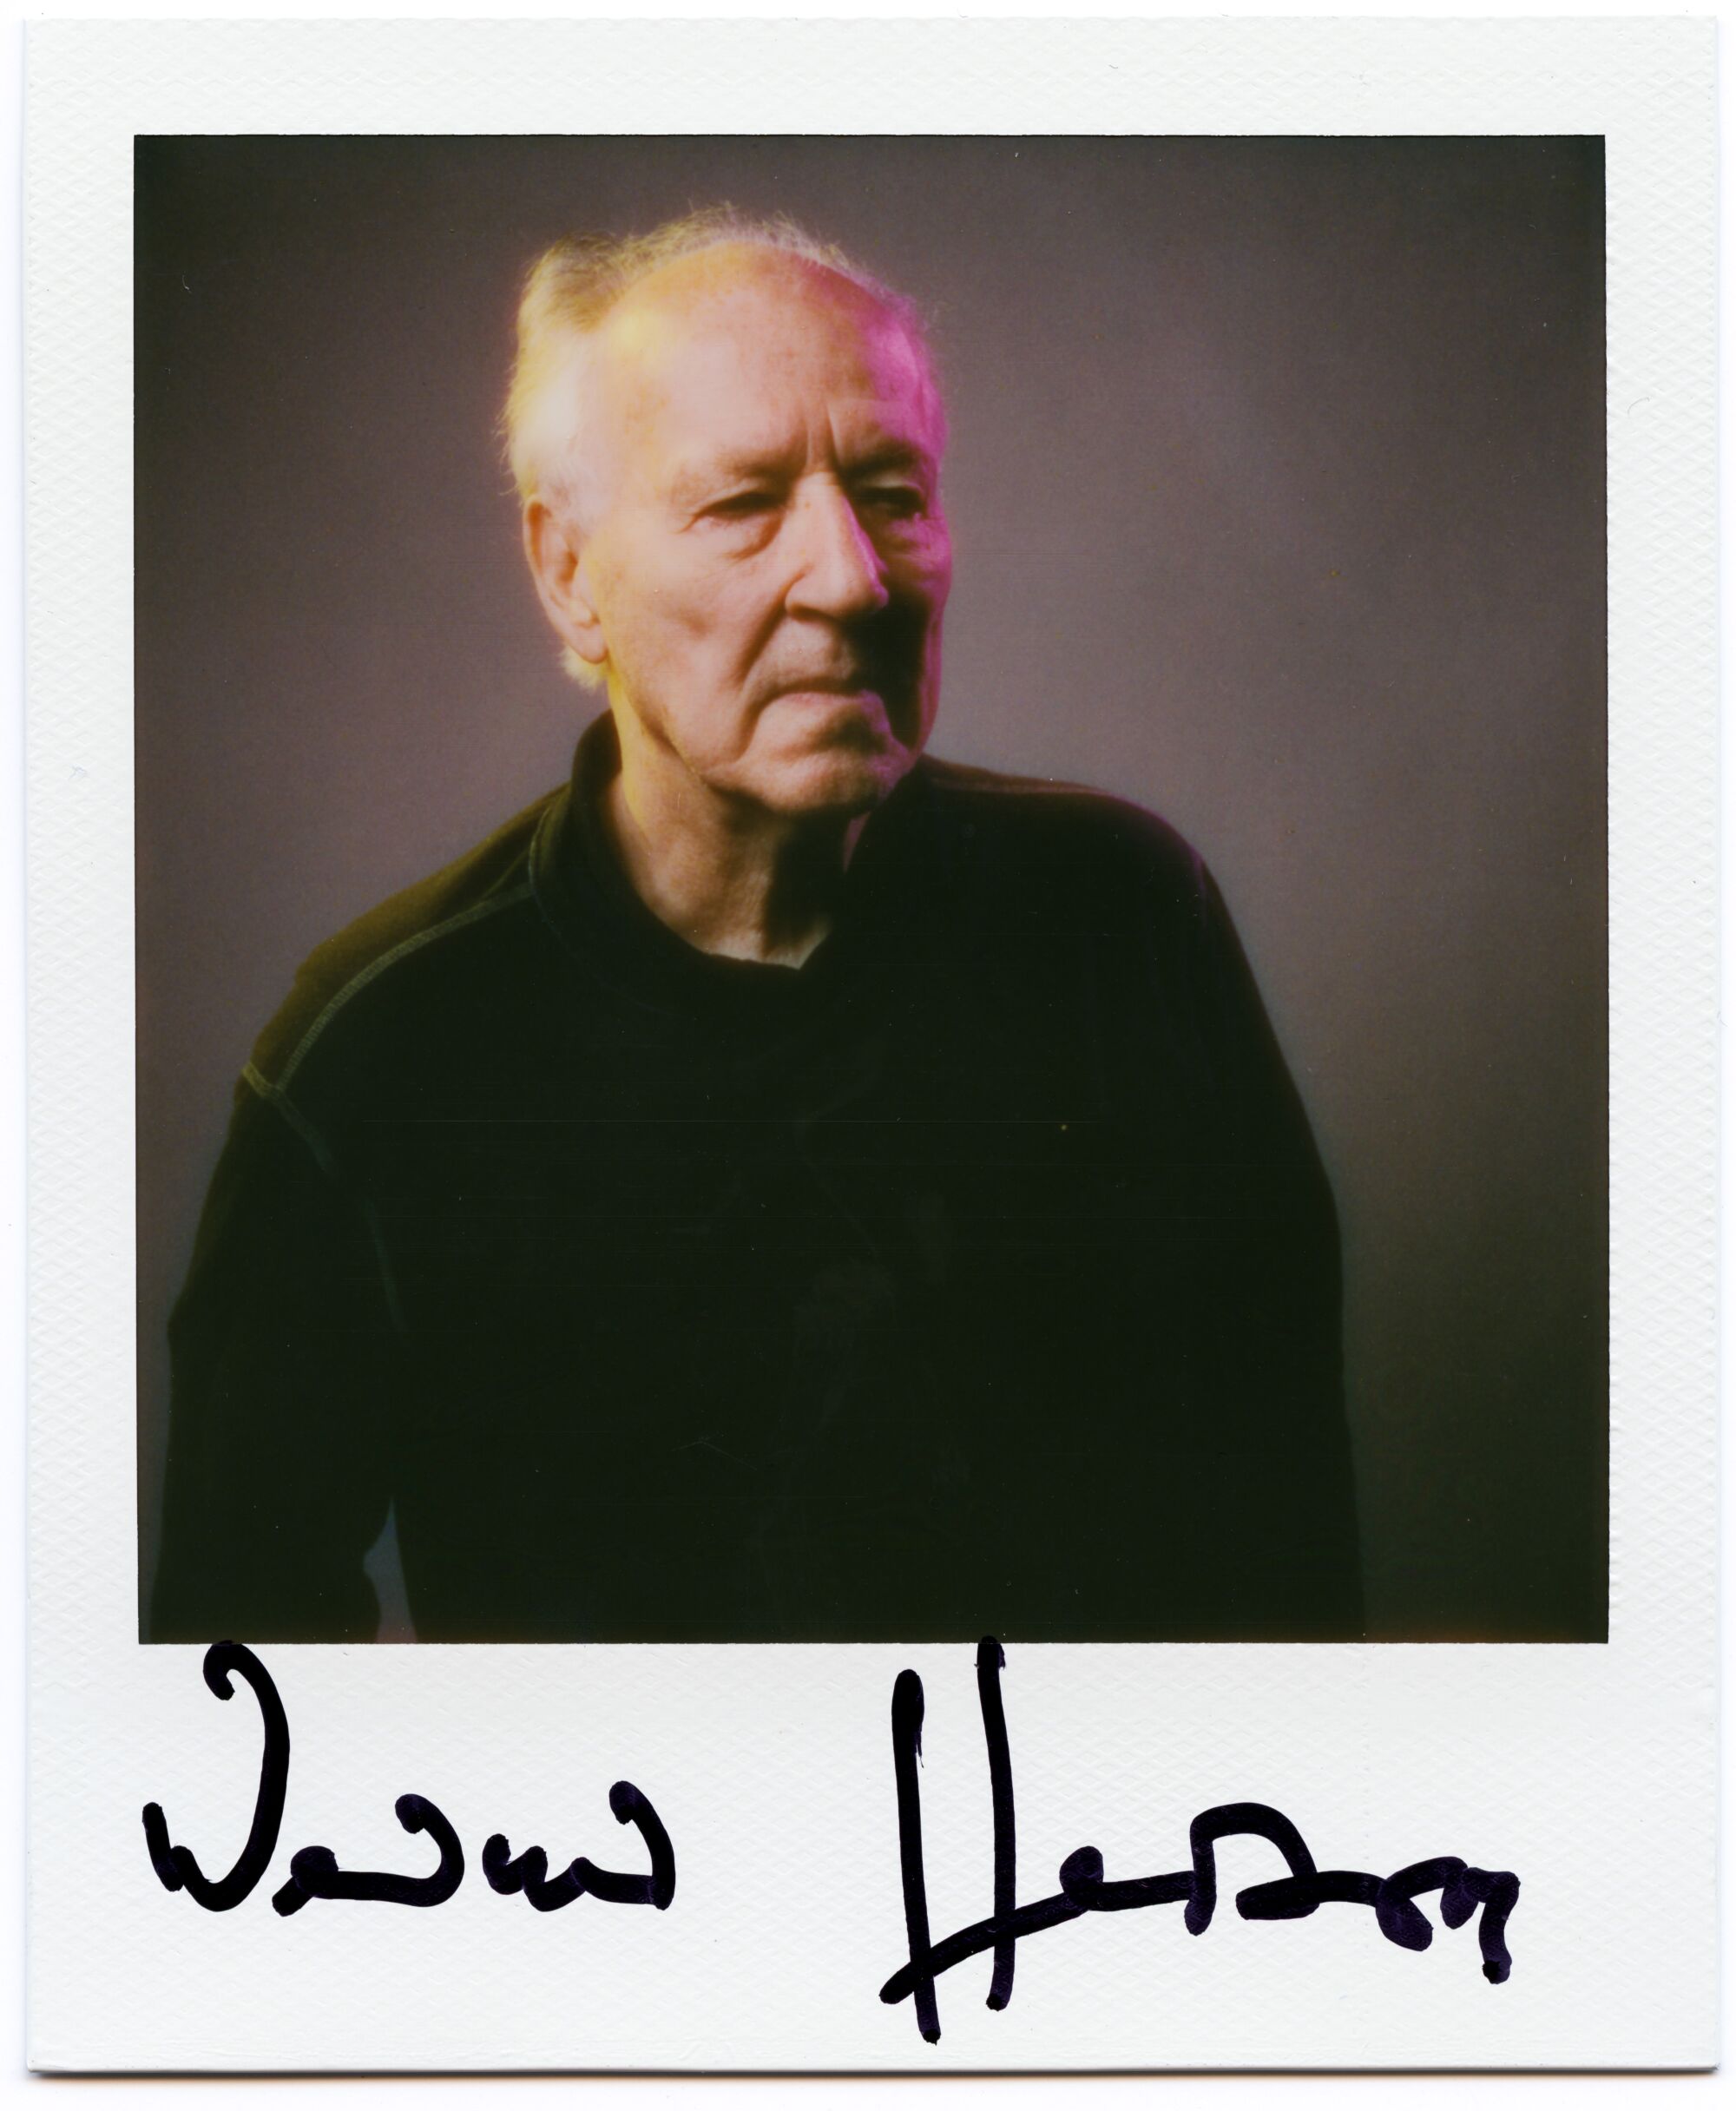 Werner Herzog of "Theater of Thought"